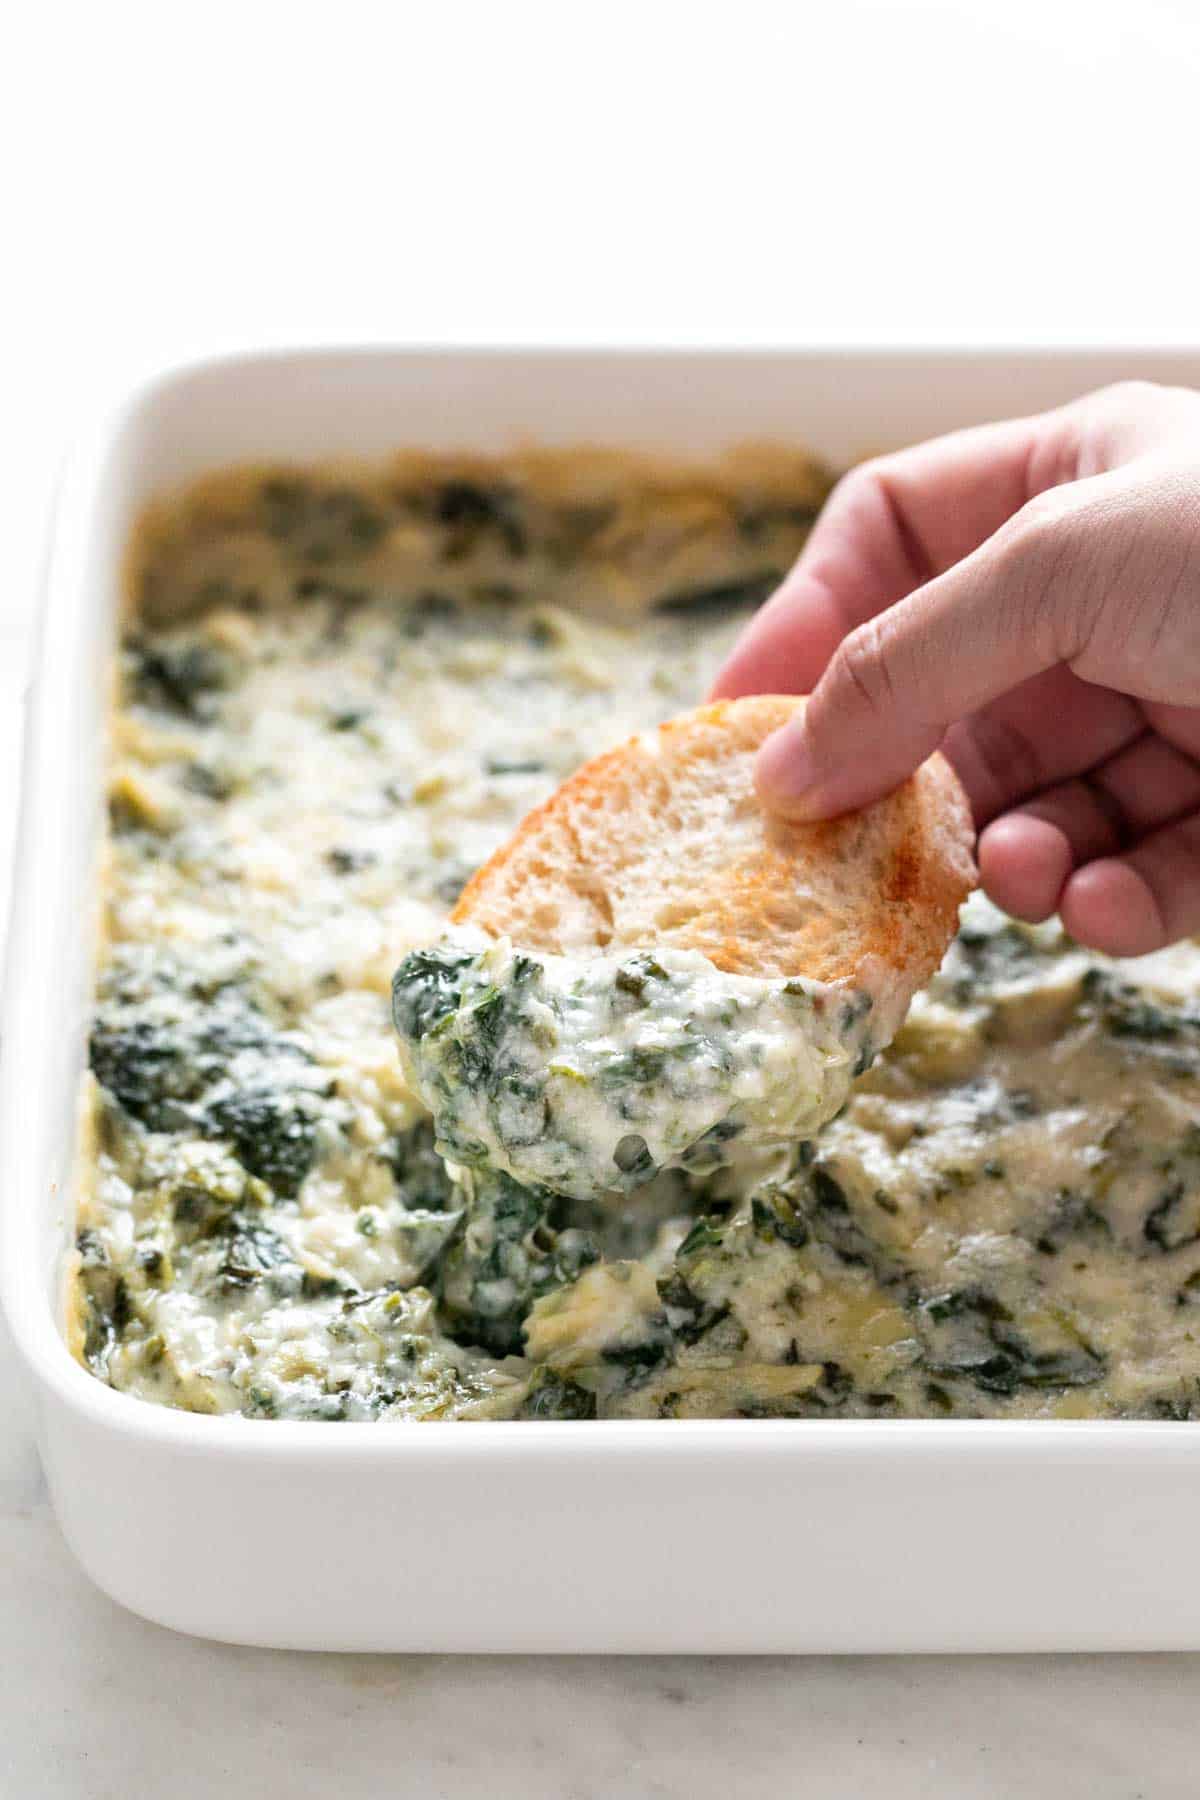 Hand dunking a slice of bread into a dish of vegan spinach artichoke dip.